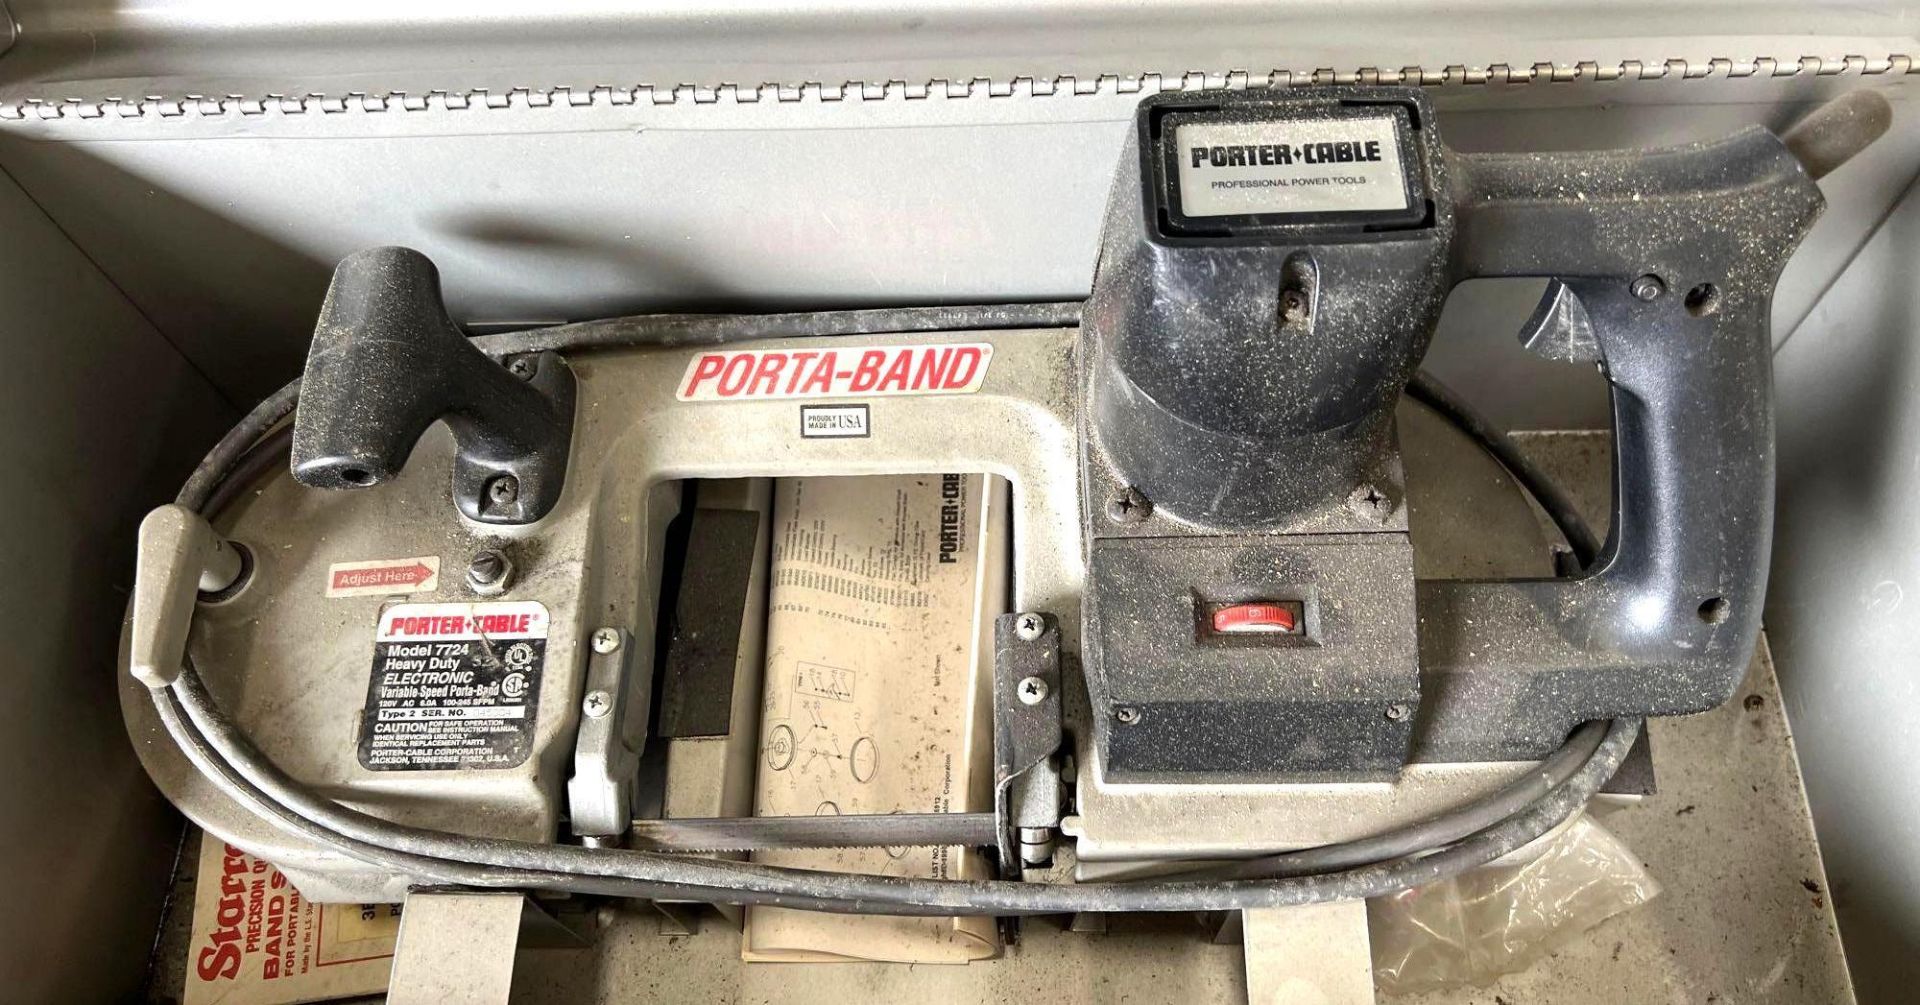 Porter Cable 7724 Variable Speed Porta-Band Saw w/ Case - Image 3 of 3